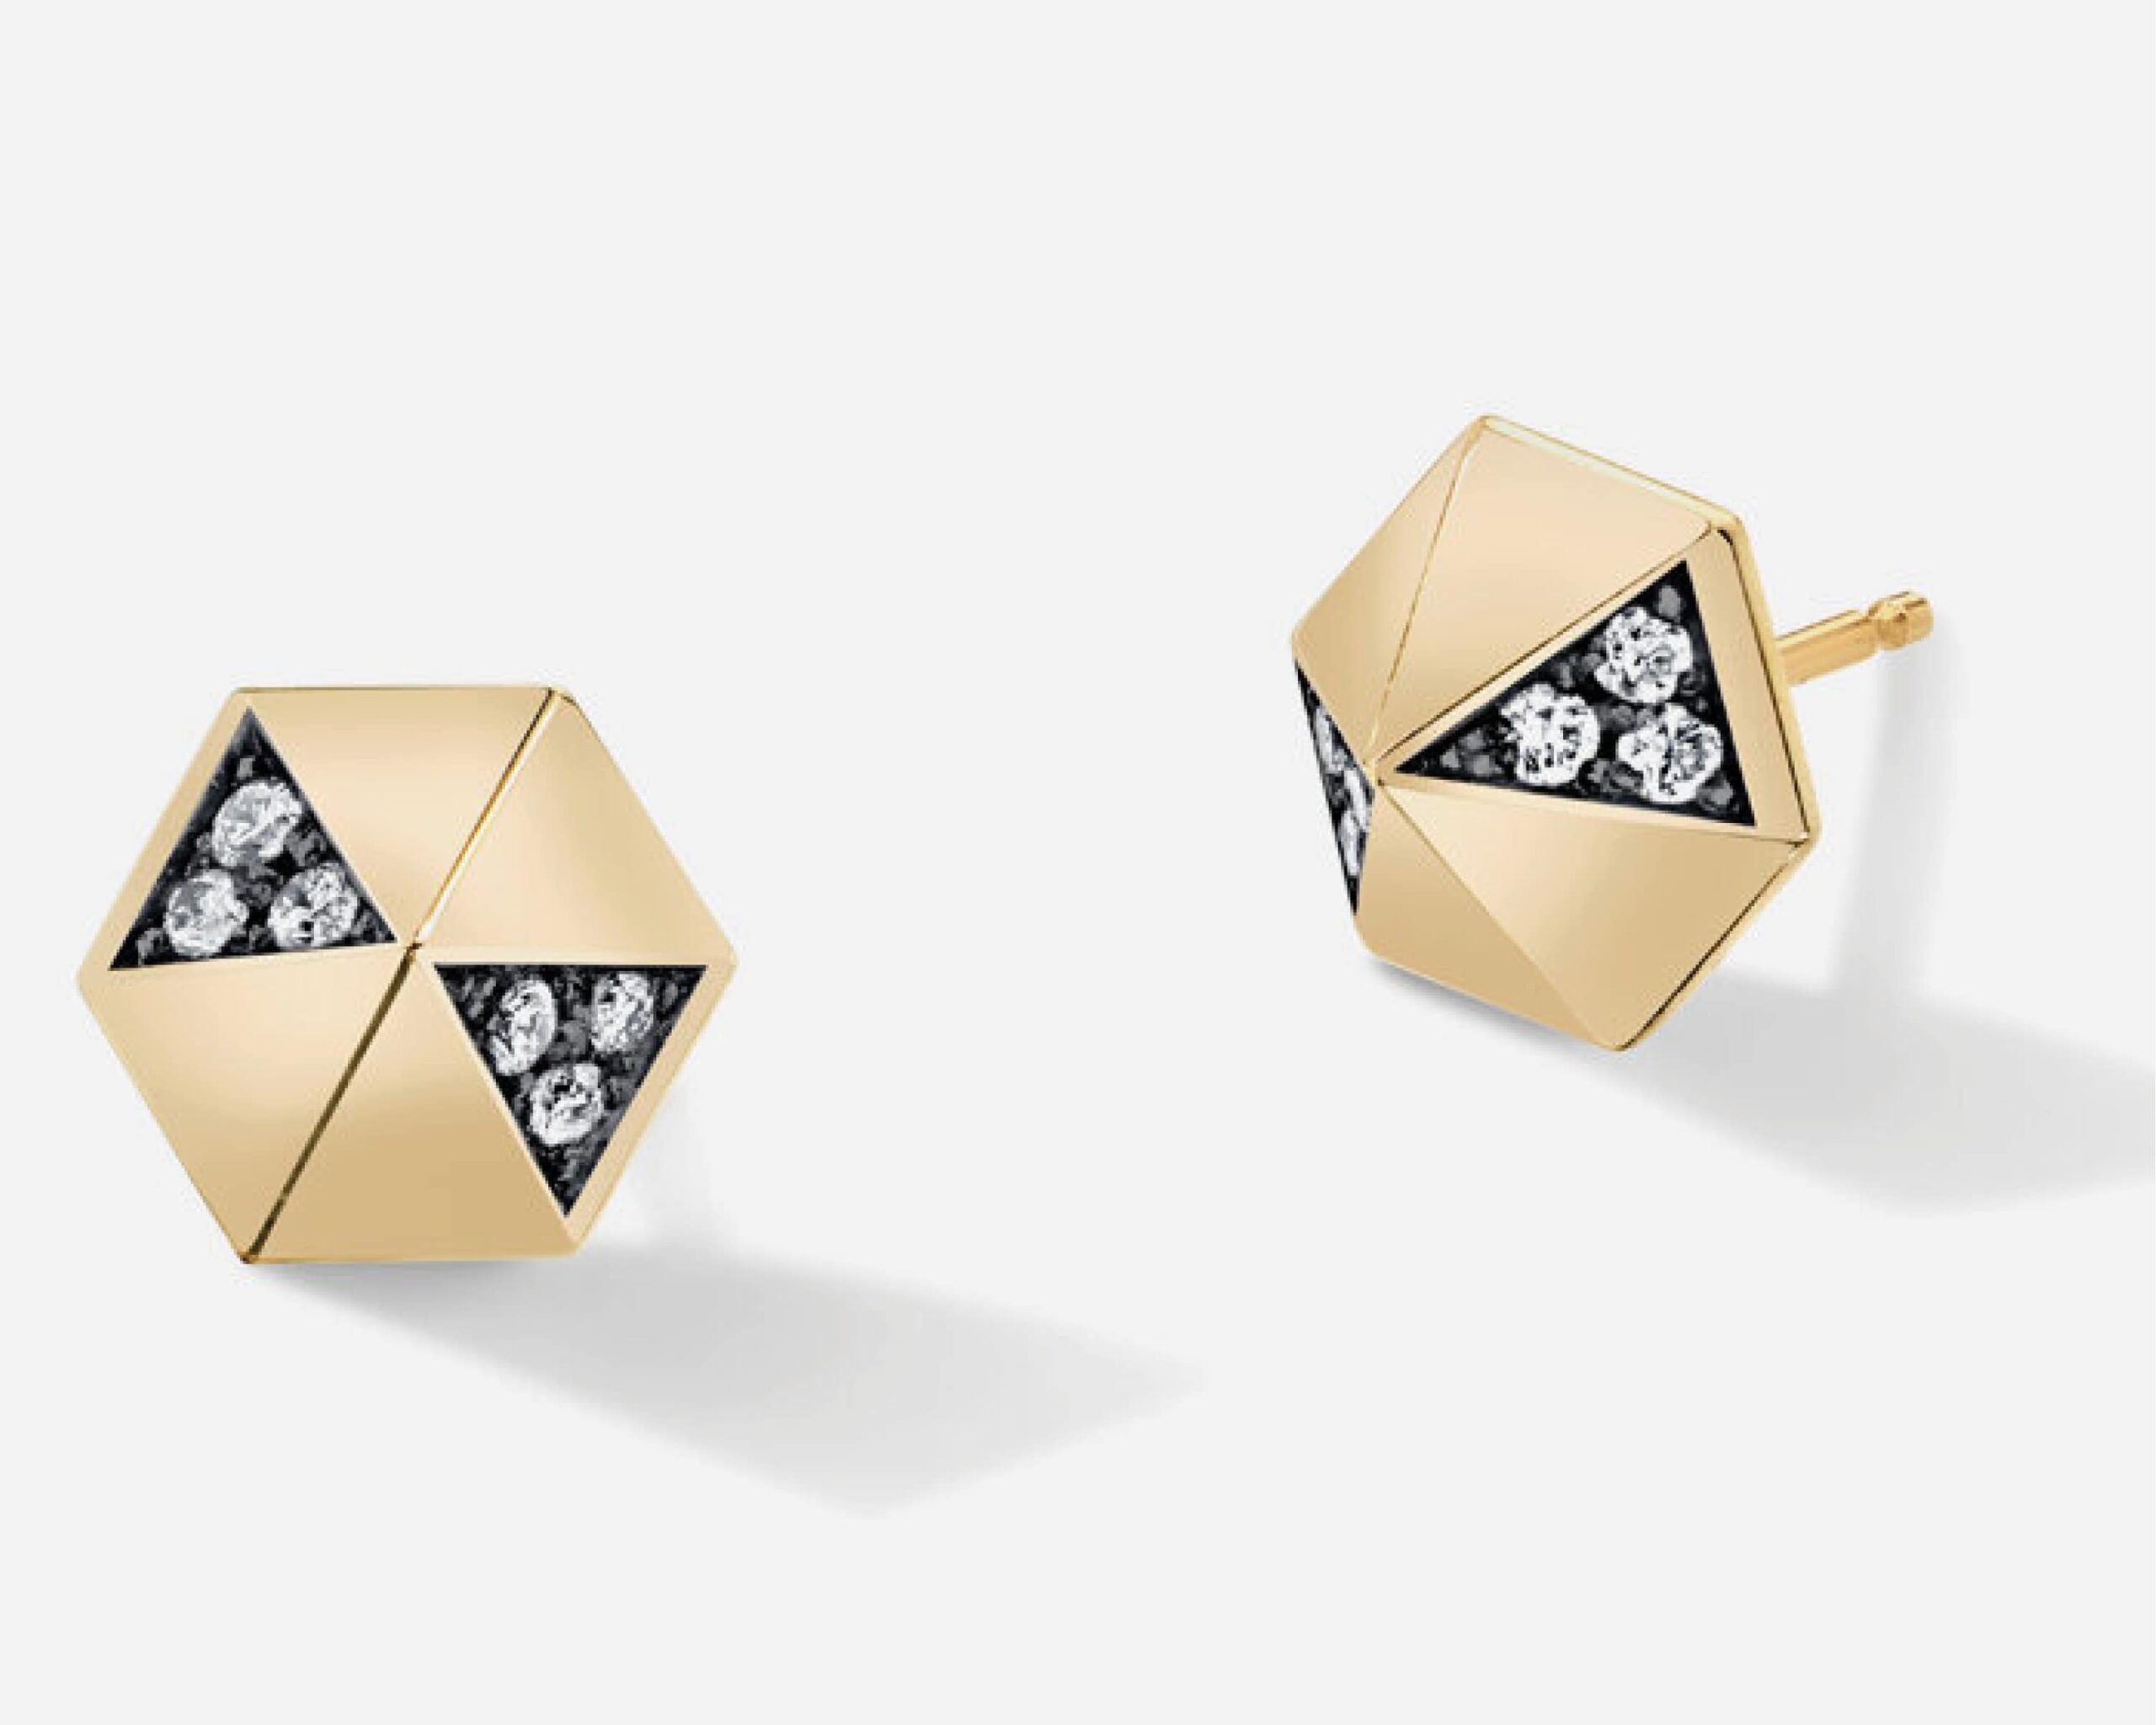 Pyramid Diamond Stud Earrings from Harwell Godfrey featuring a geometric pyramid earring design with white diamonds set in black rhodium 